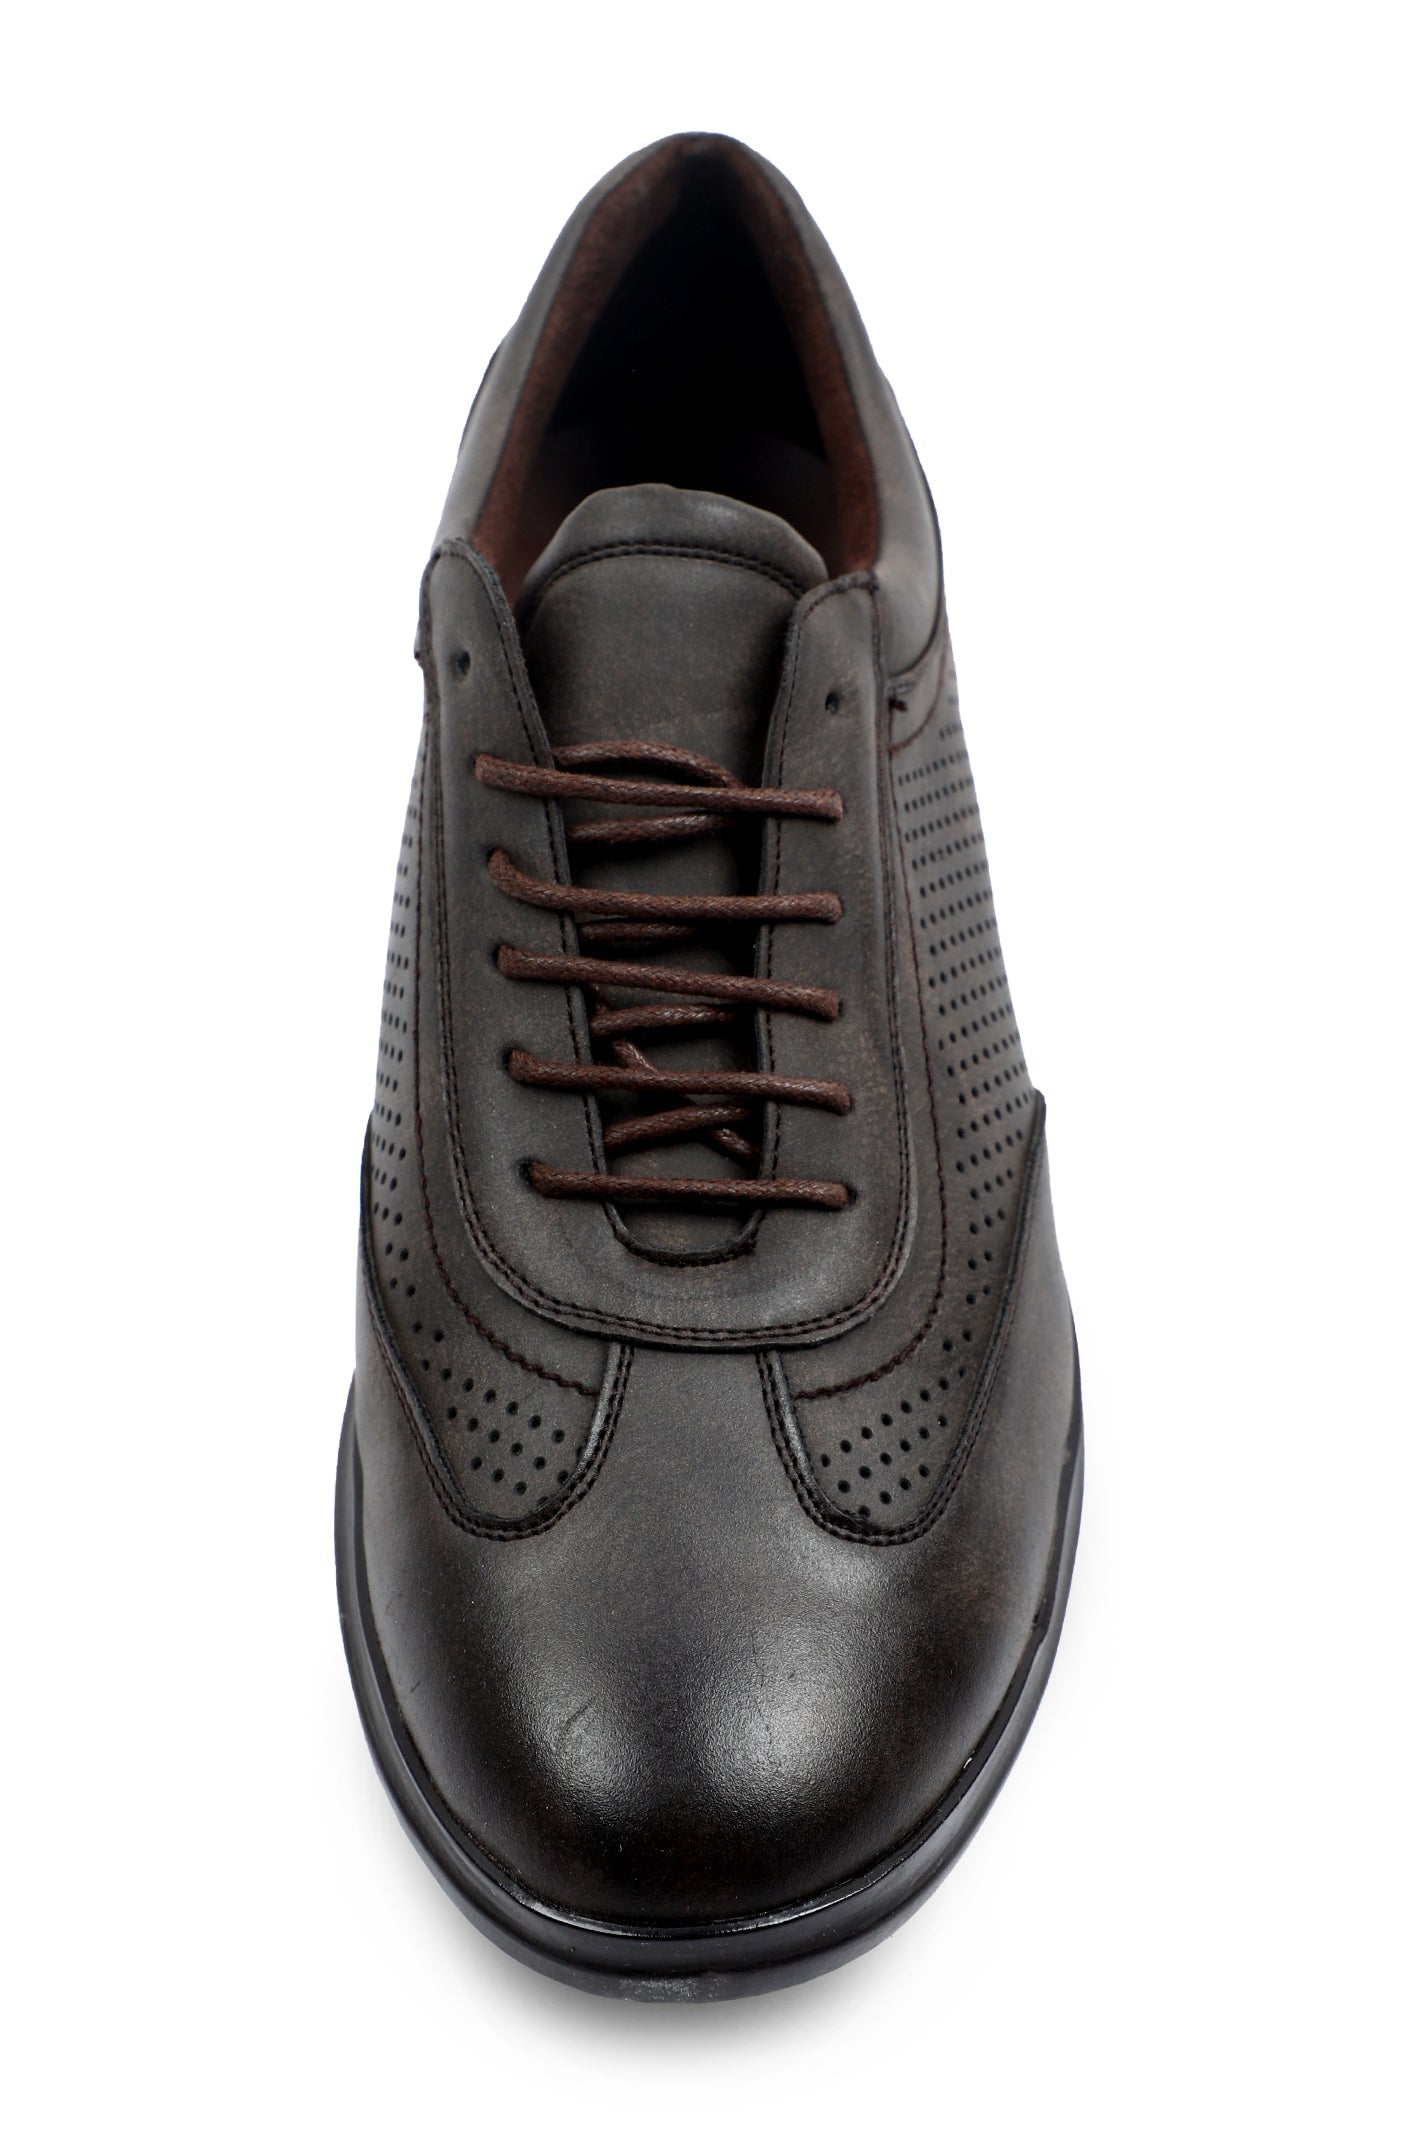 Casual Shoes For Men in Coffee SKU: SMJ0009-COFFEE - Diners